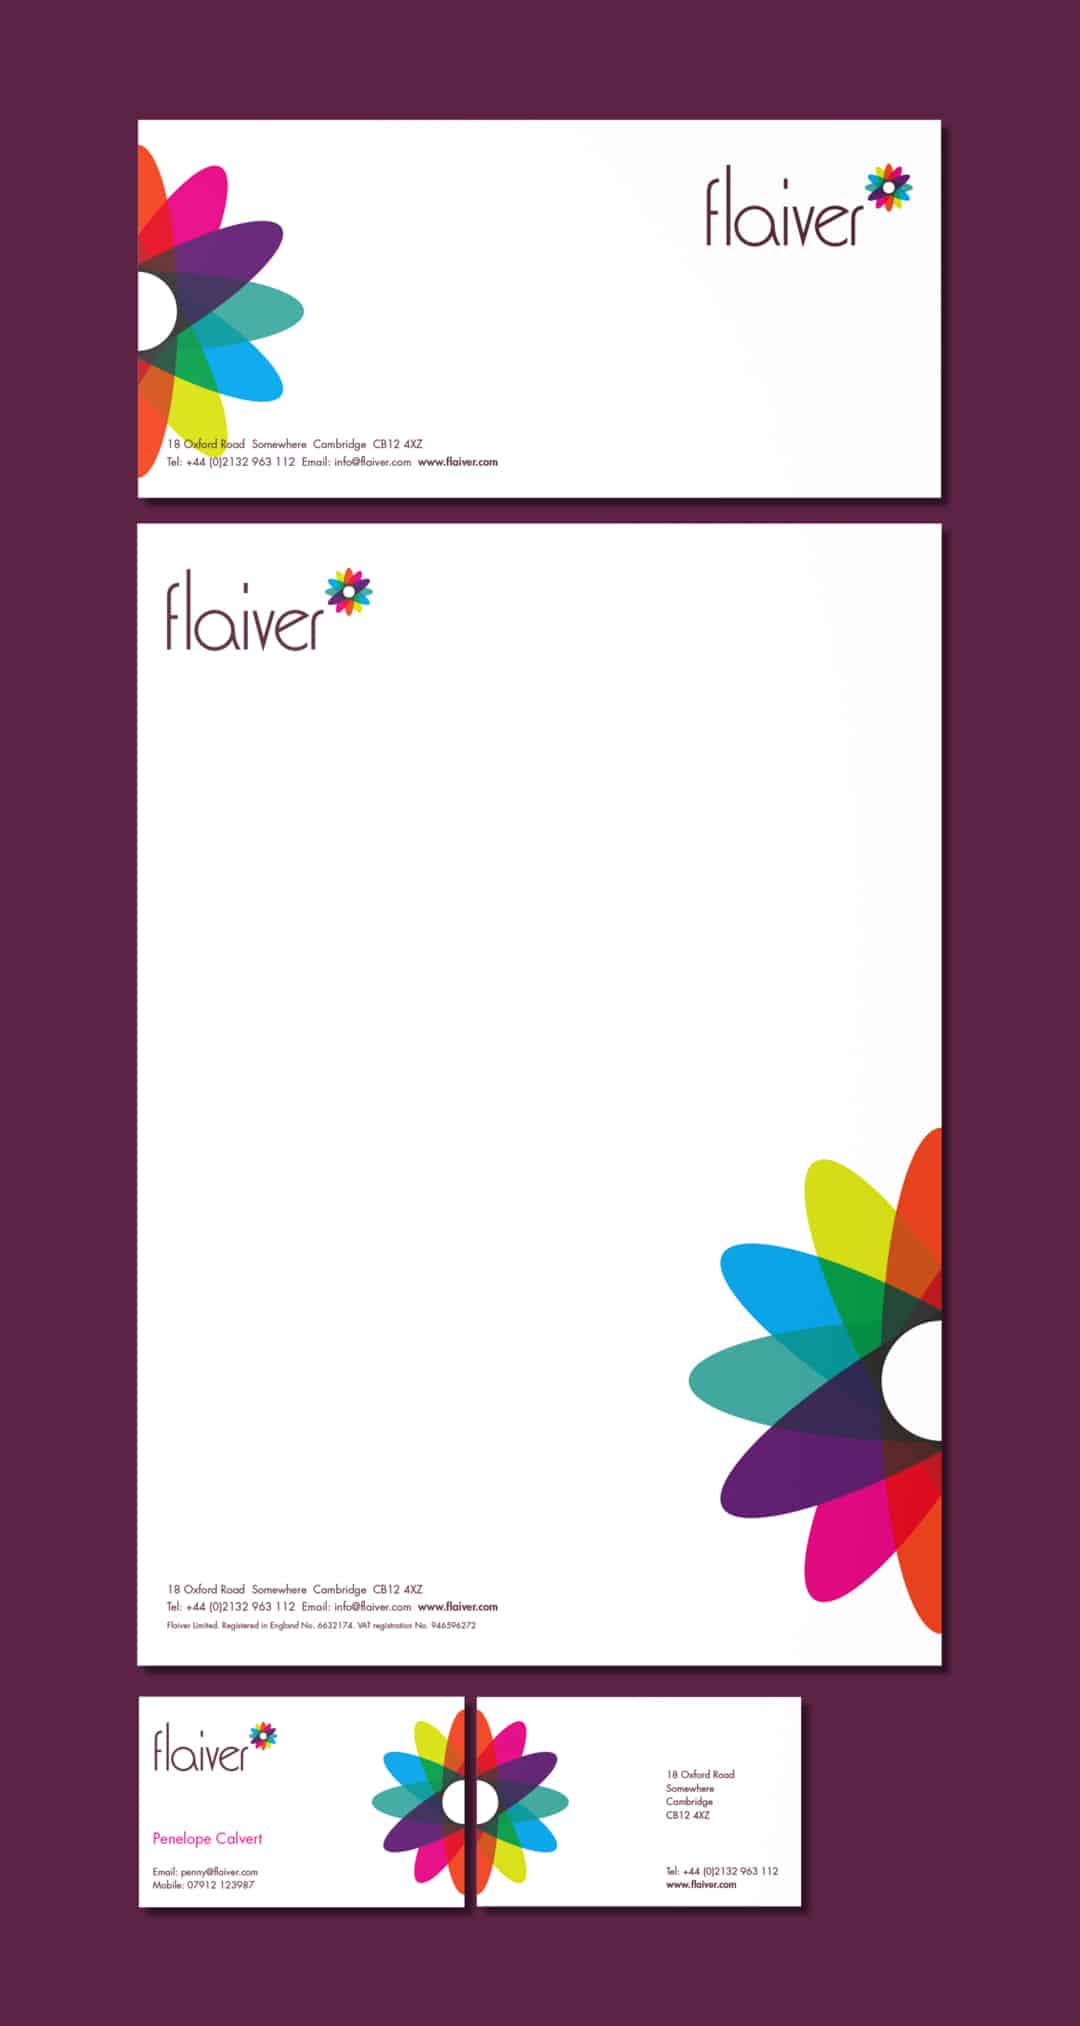 Flaiver Women's fashion brand logo and stationery designed by Paul Cartwright Branding.